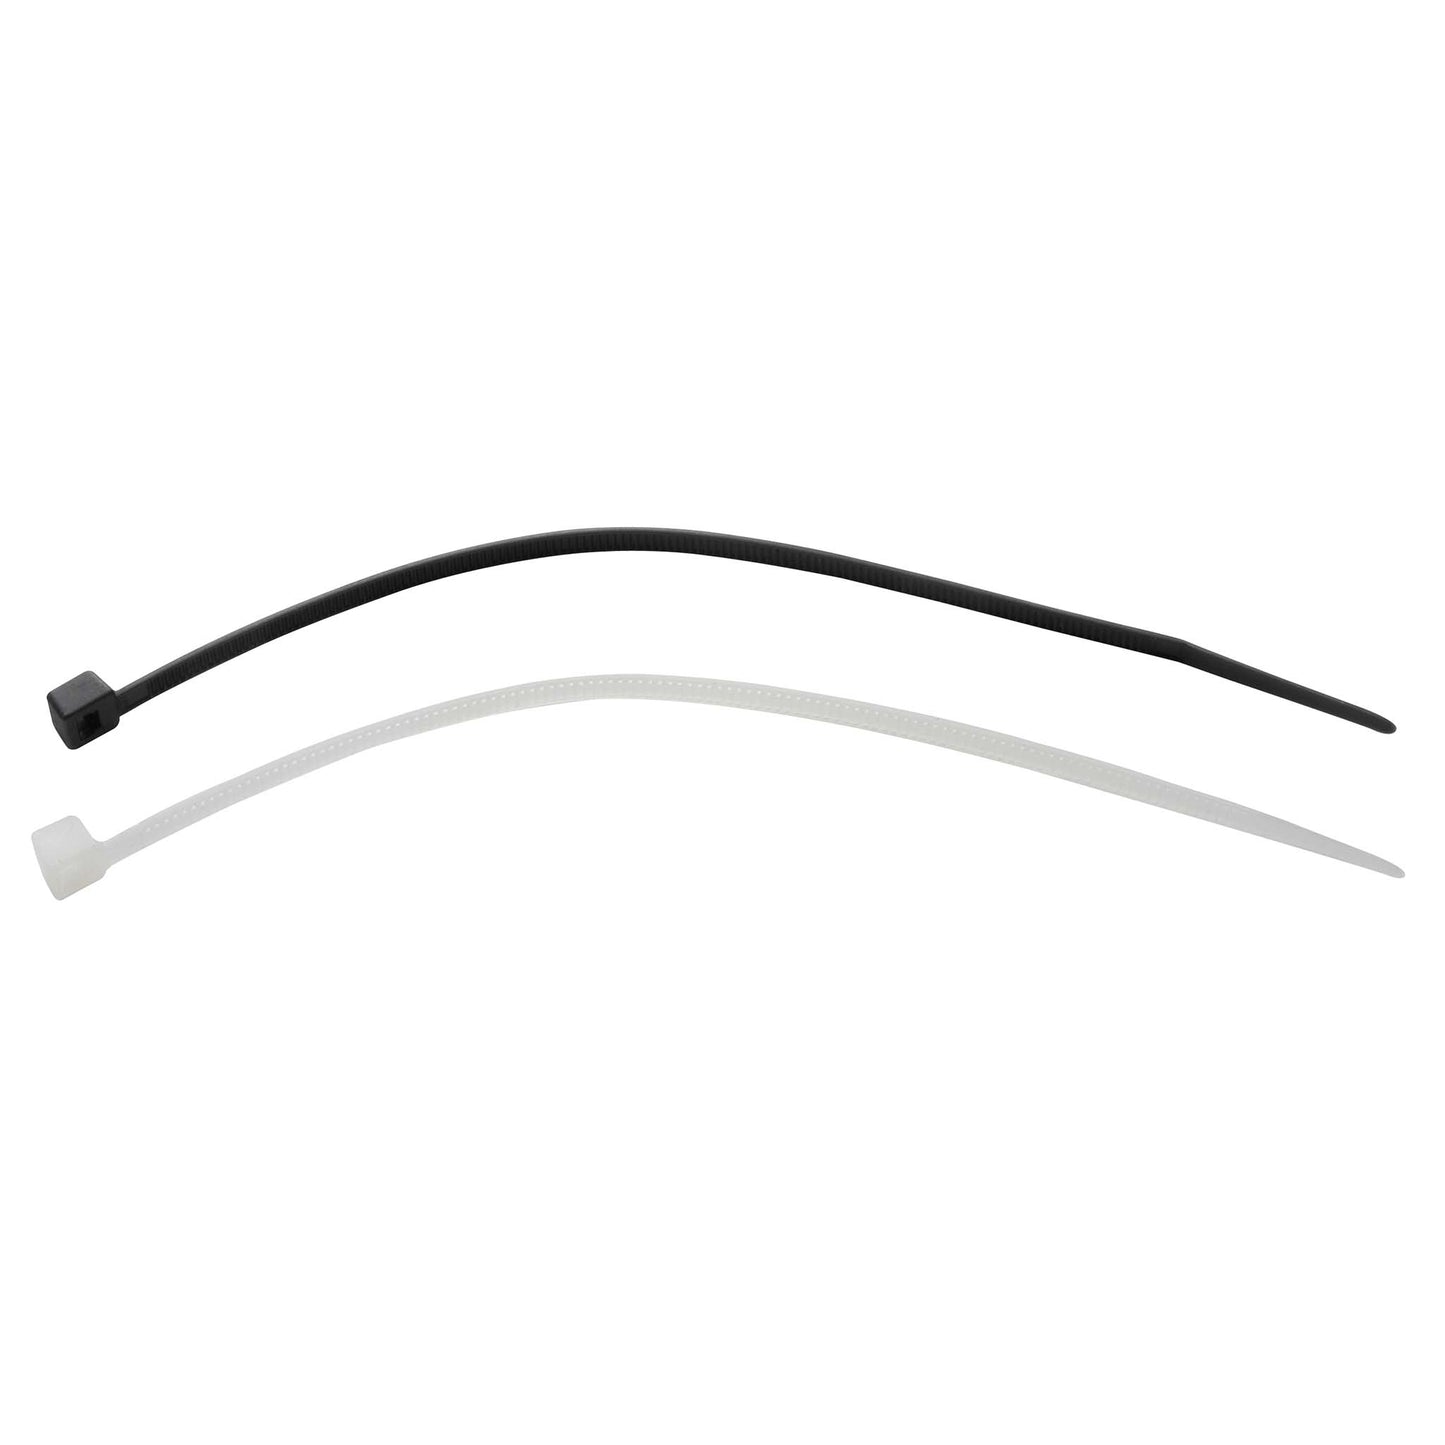 Cable ties 290 x 4.8 mm - transparent